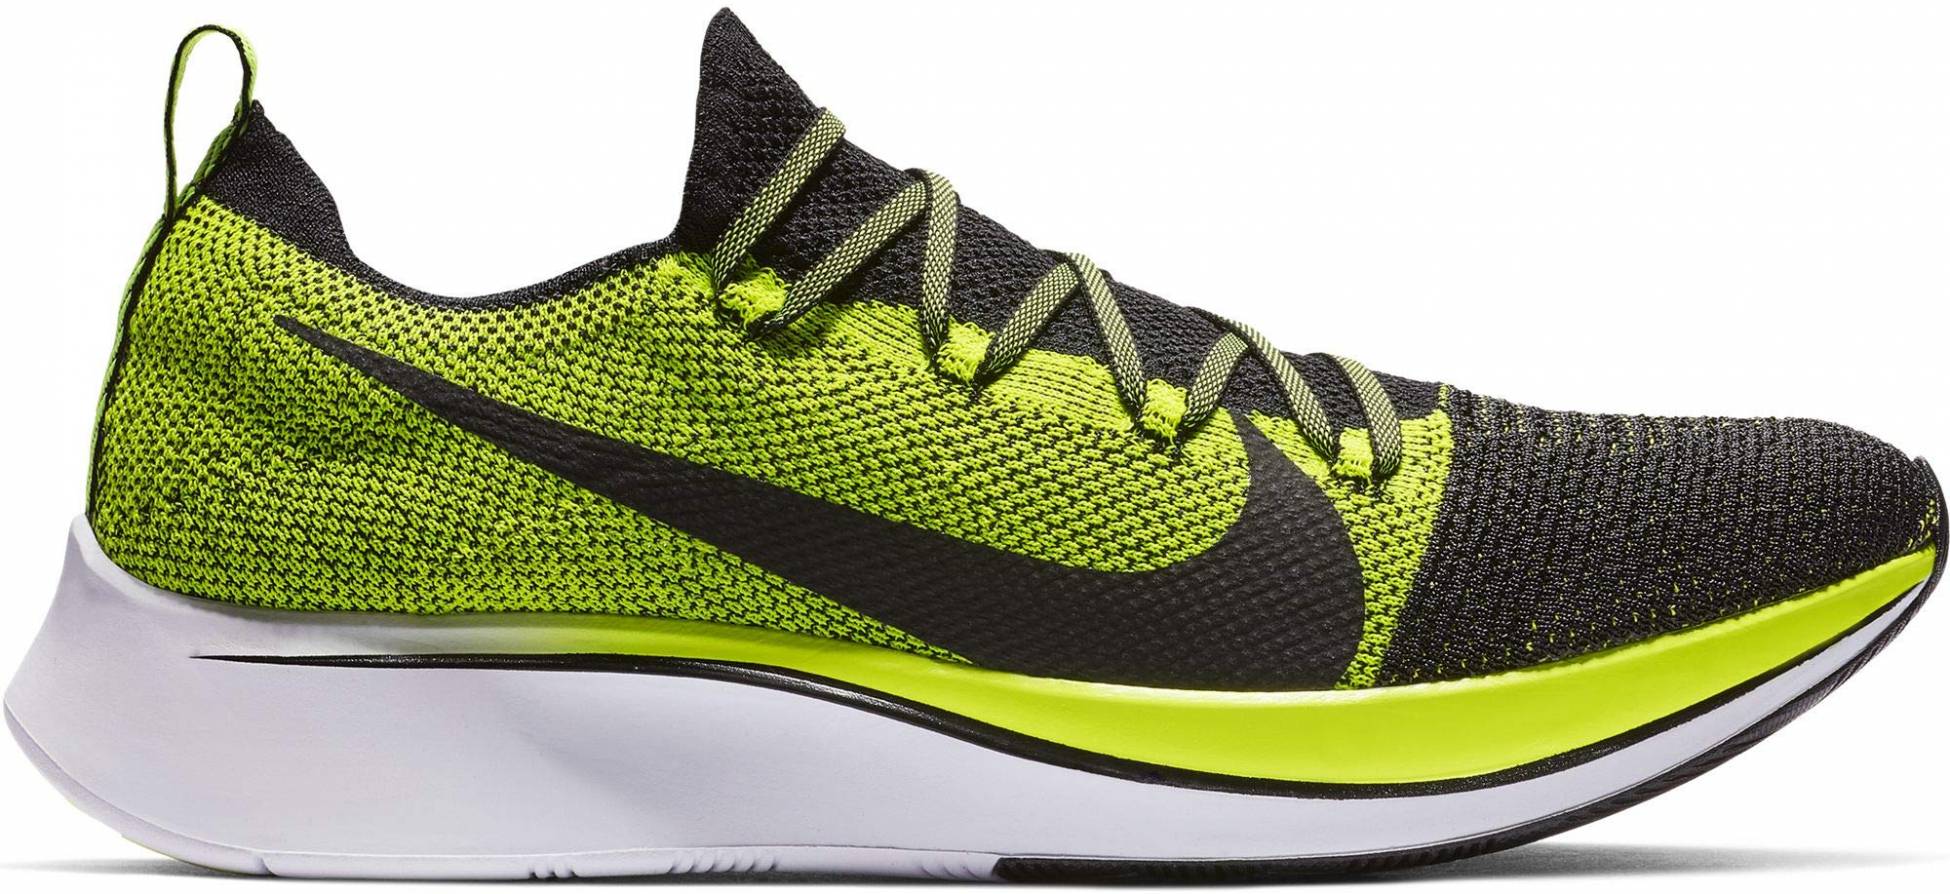 Nike Zoom Fly Flyknit - Review 2021 - Facts, Deals ($140) | RunRepeat